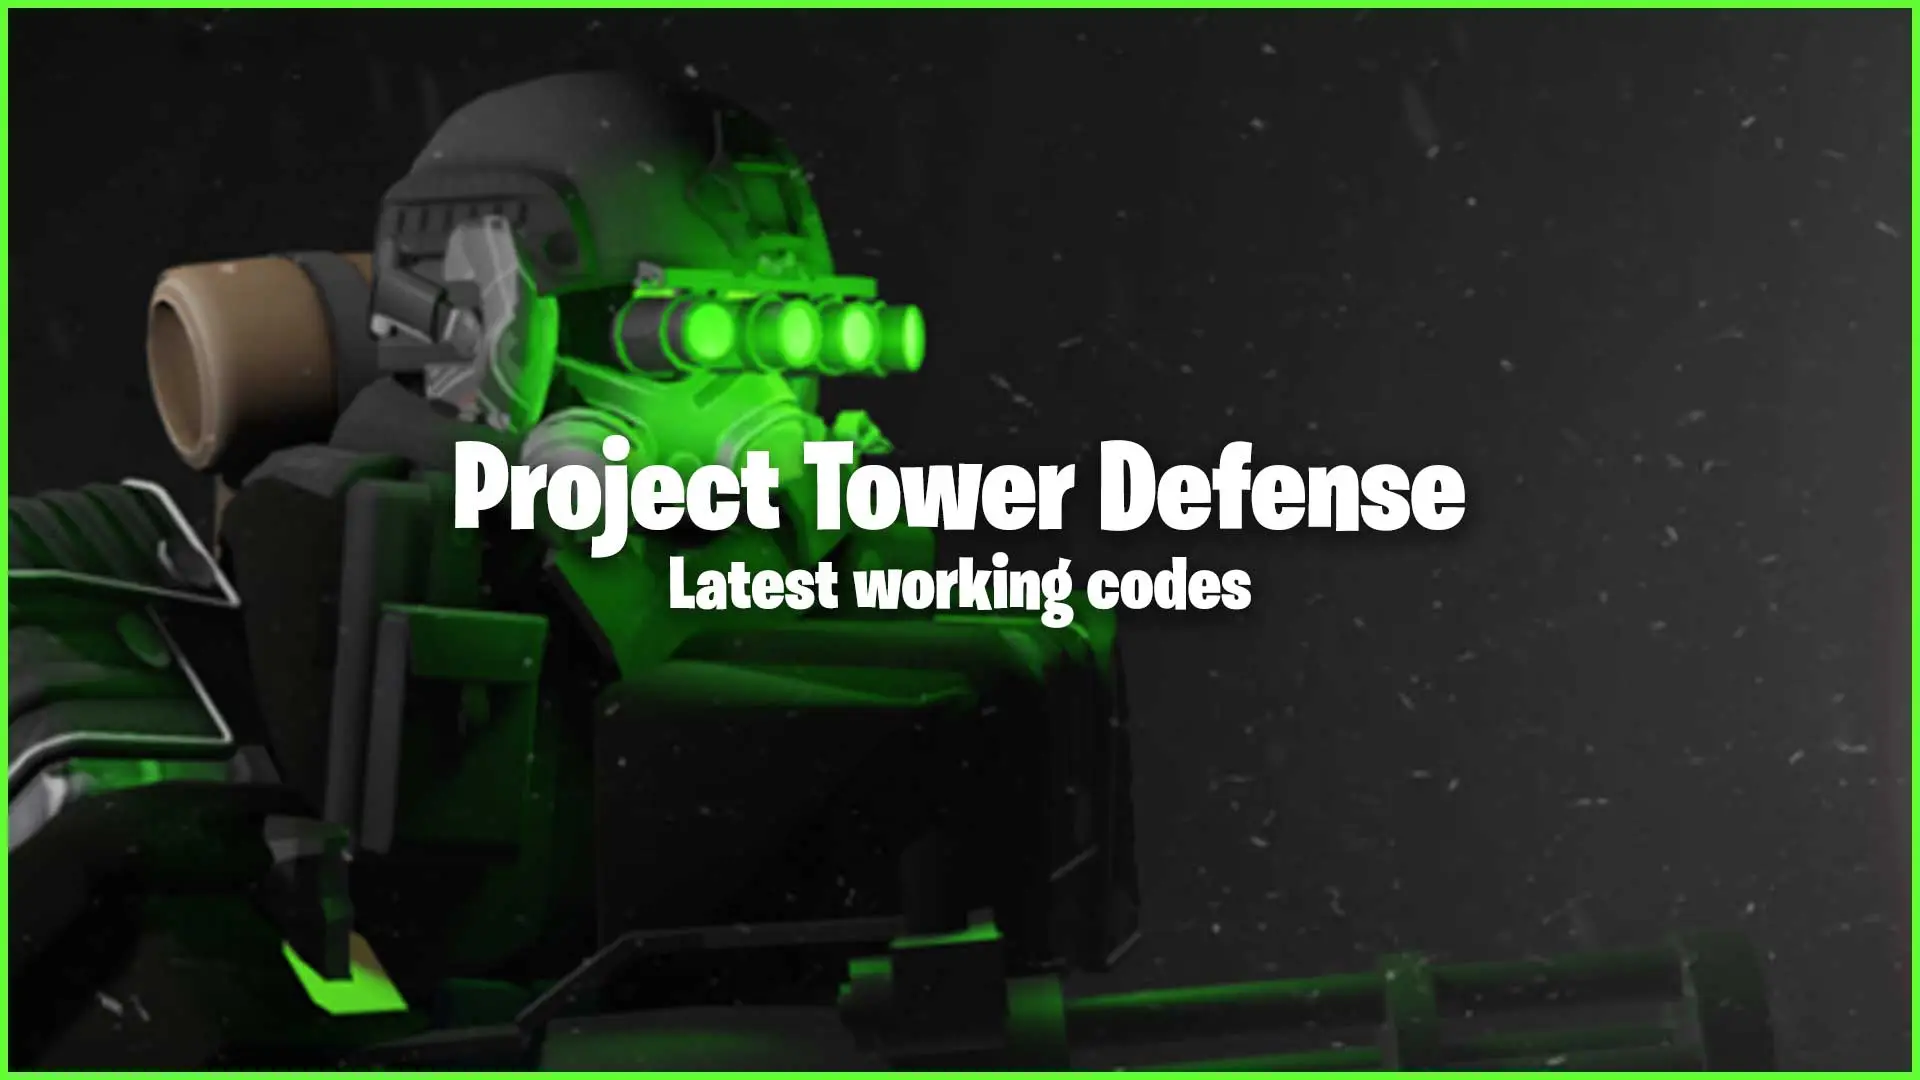 NEW* ALL WORKING CODES FOR TOWER DEFENSE SIMULATOR IN OCTOBER 2022